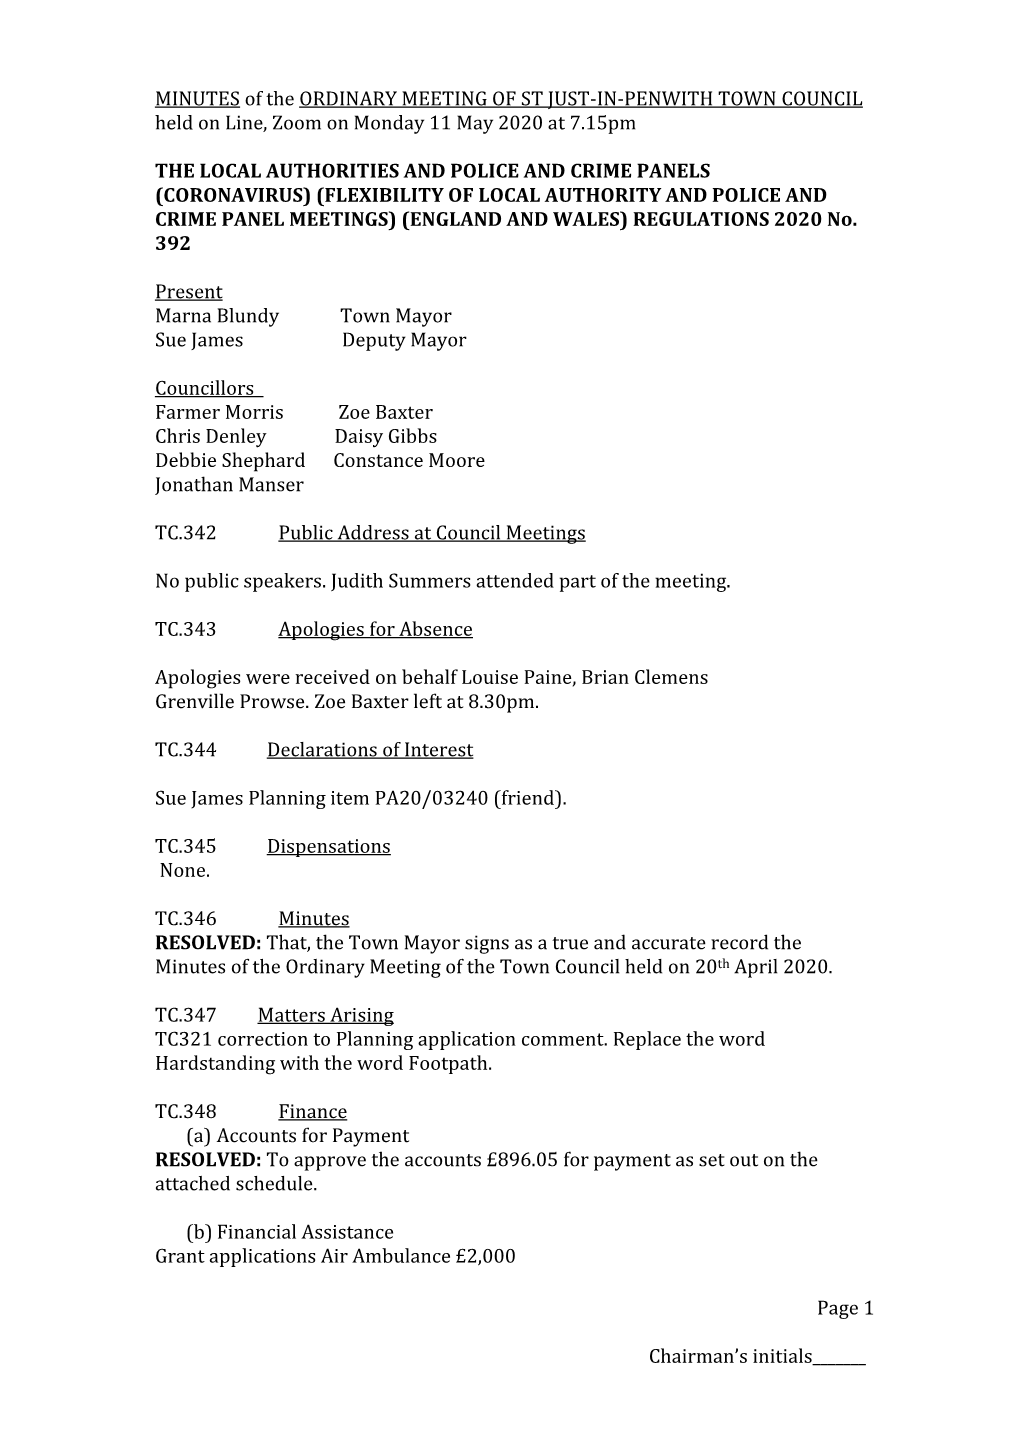 MINUTES of the ORDINARY MEETING of ST JUST-IN-PENWITH TOWN COUNCIL Held on Line, Zoom on Monday 11 May 2020 at 7.15Pm